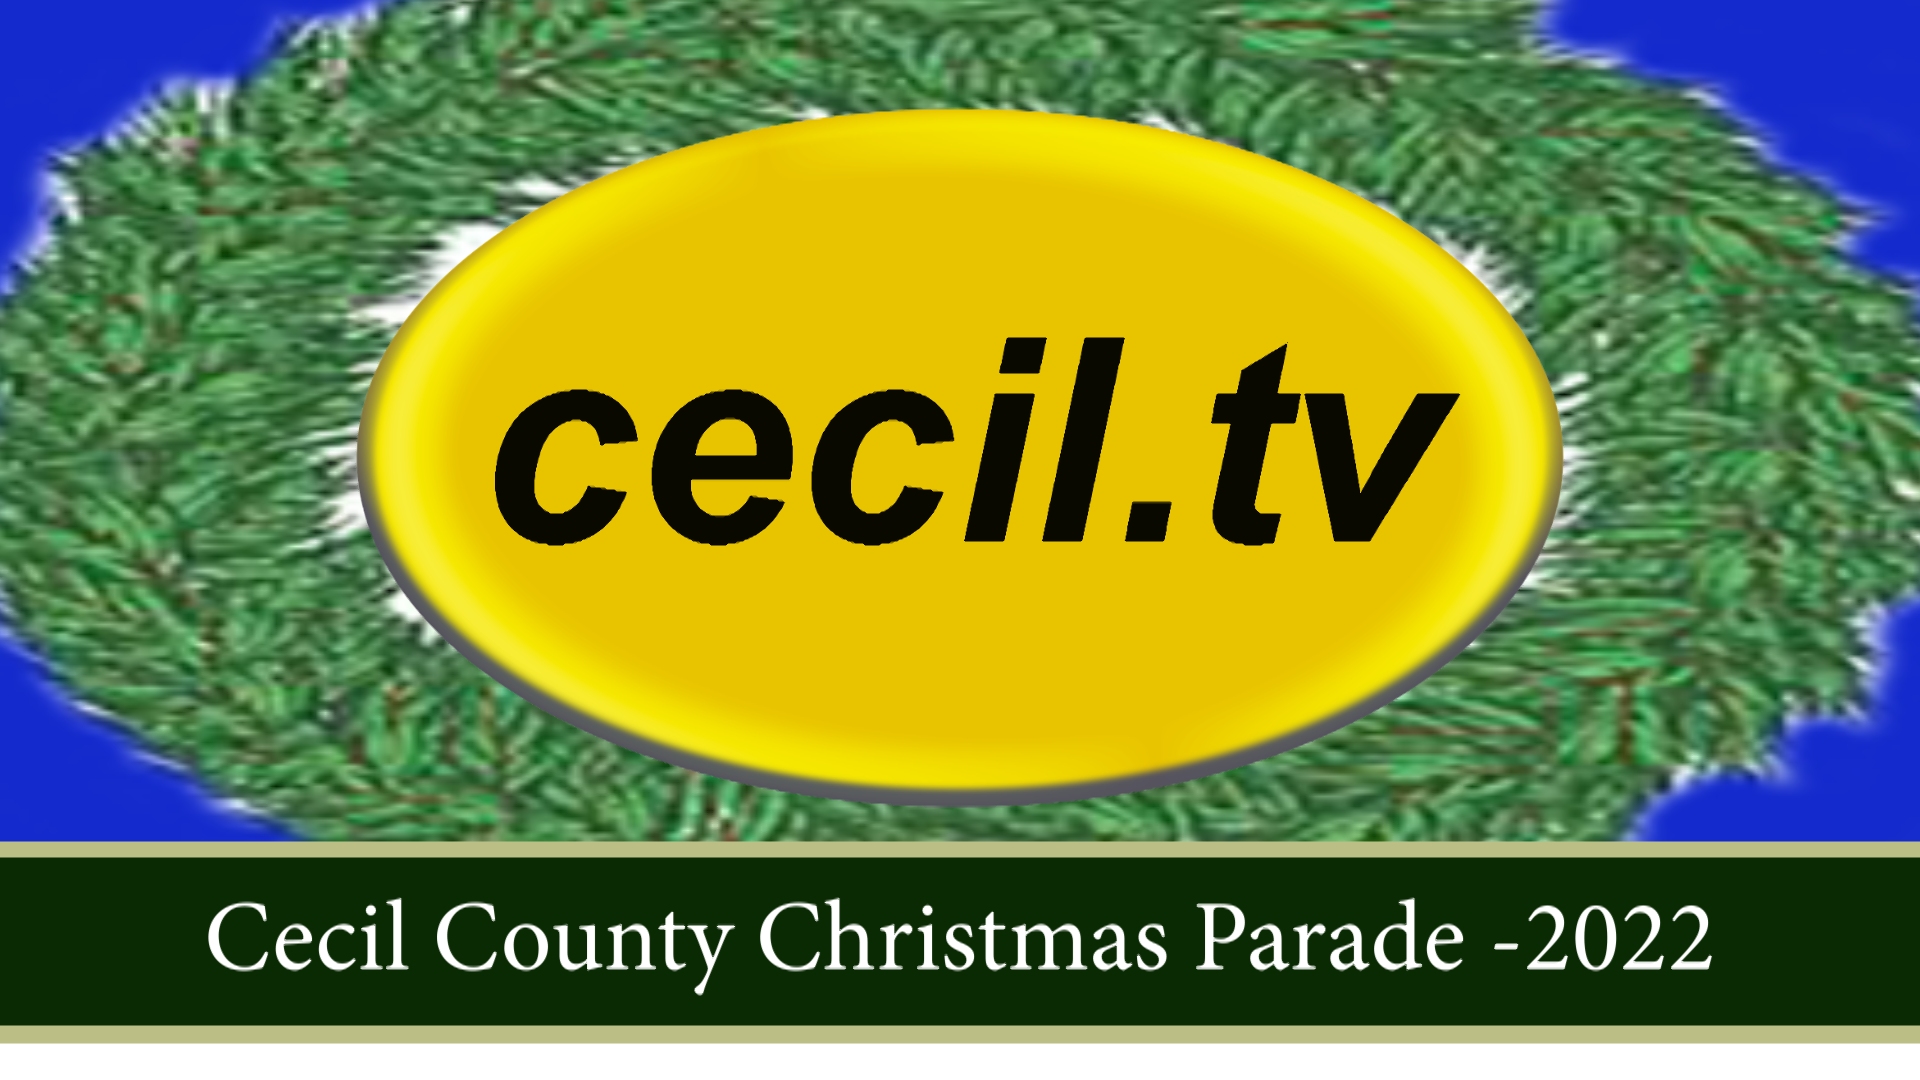 The 2022 Cecil County Christmas Parade